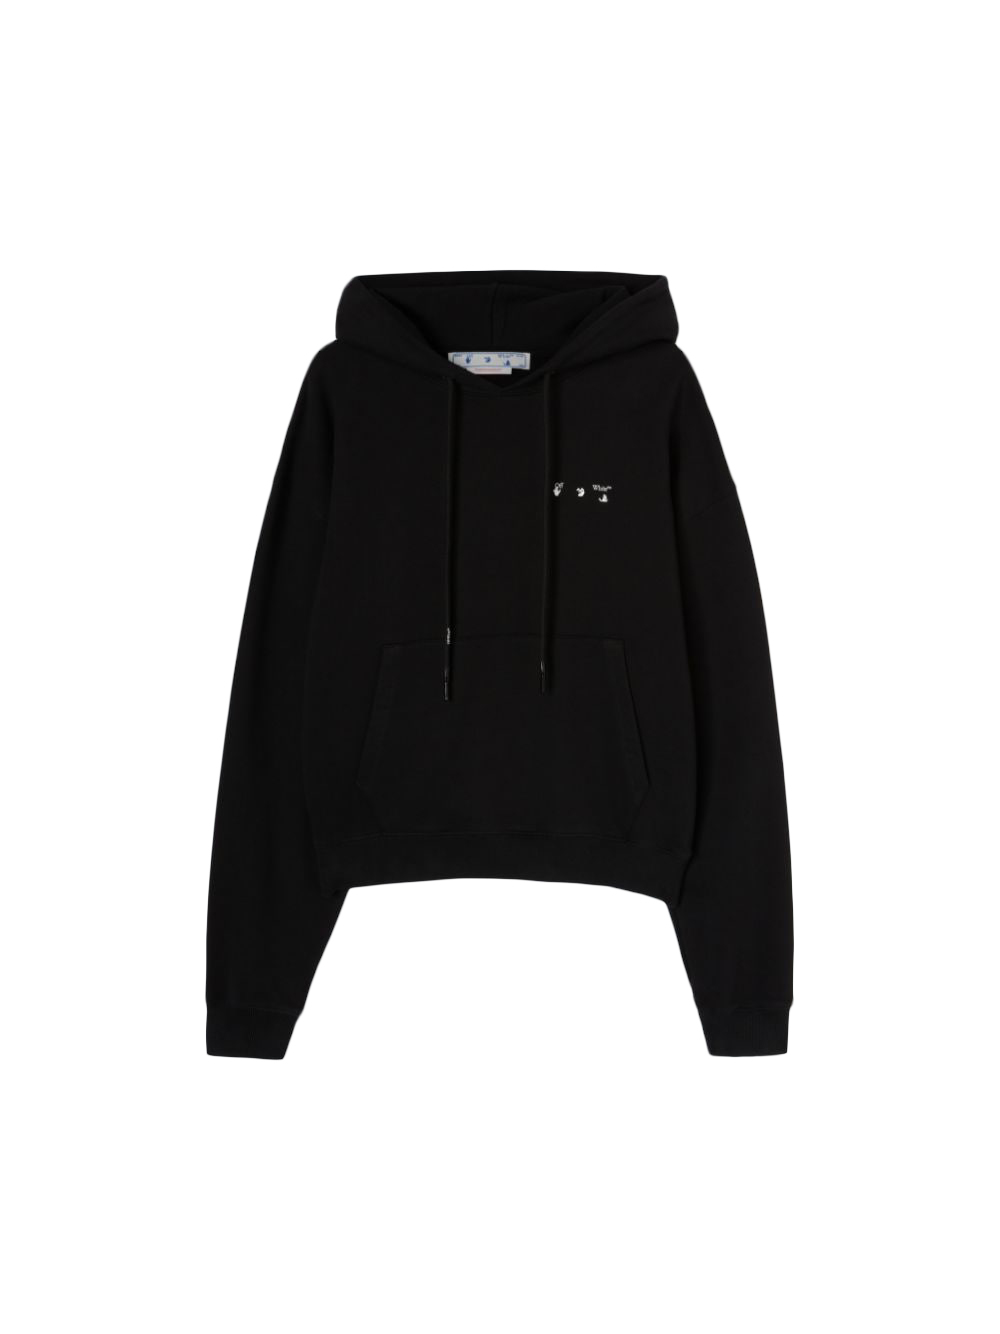 Off-White Caravaggio Paint Over hoodie - Black